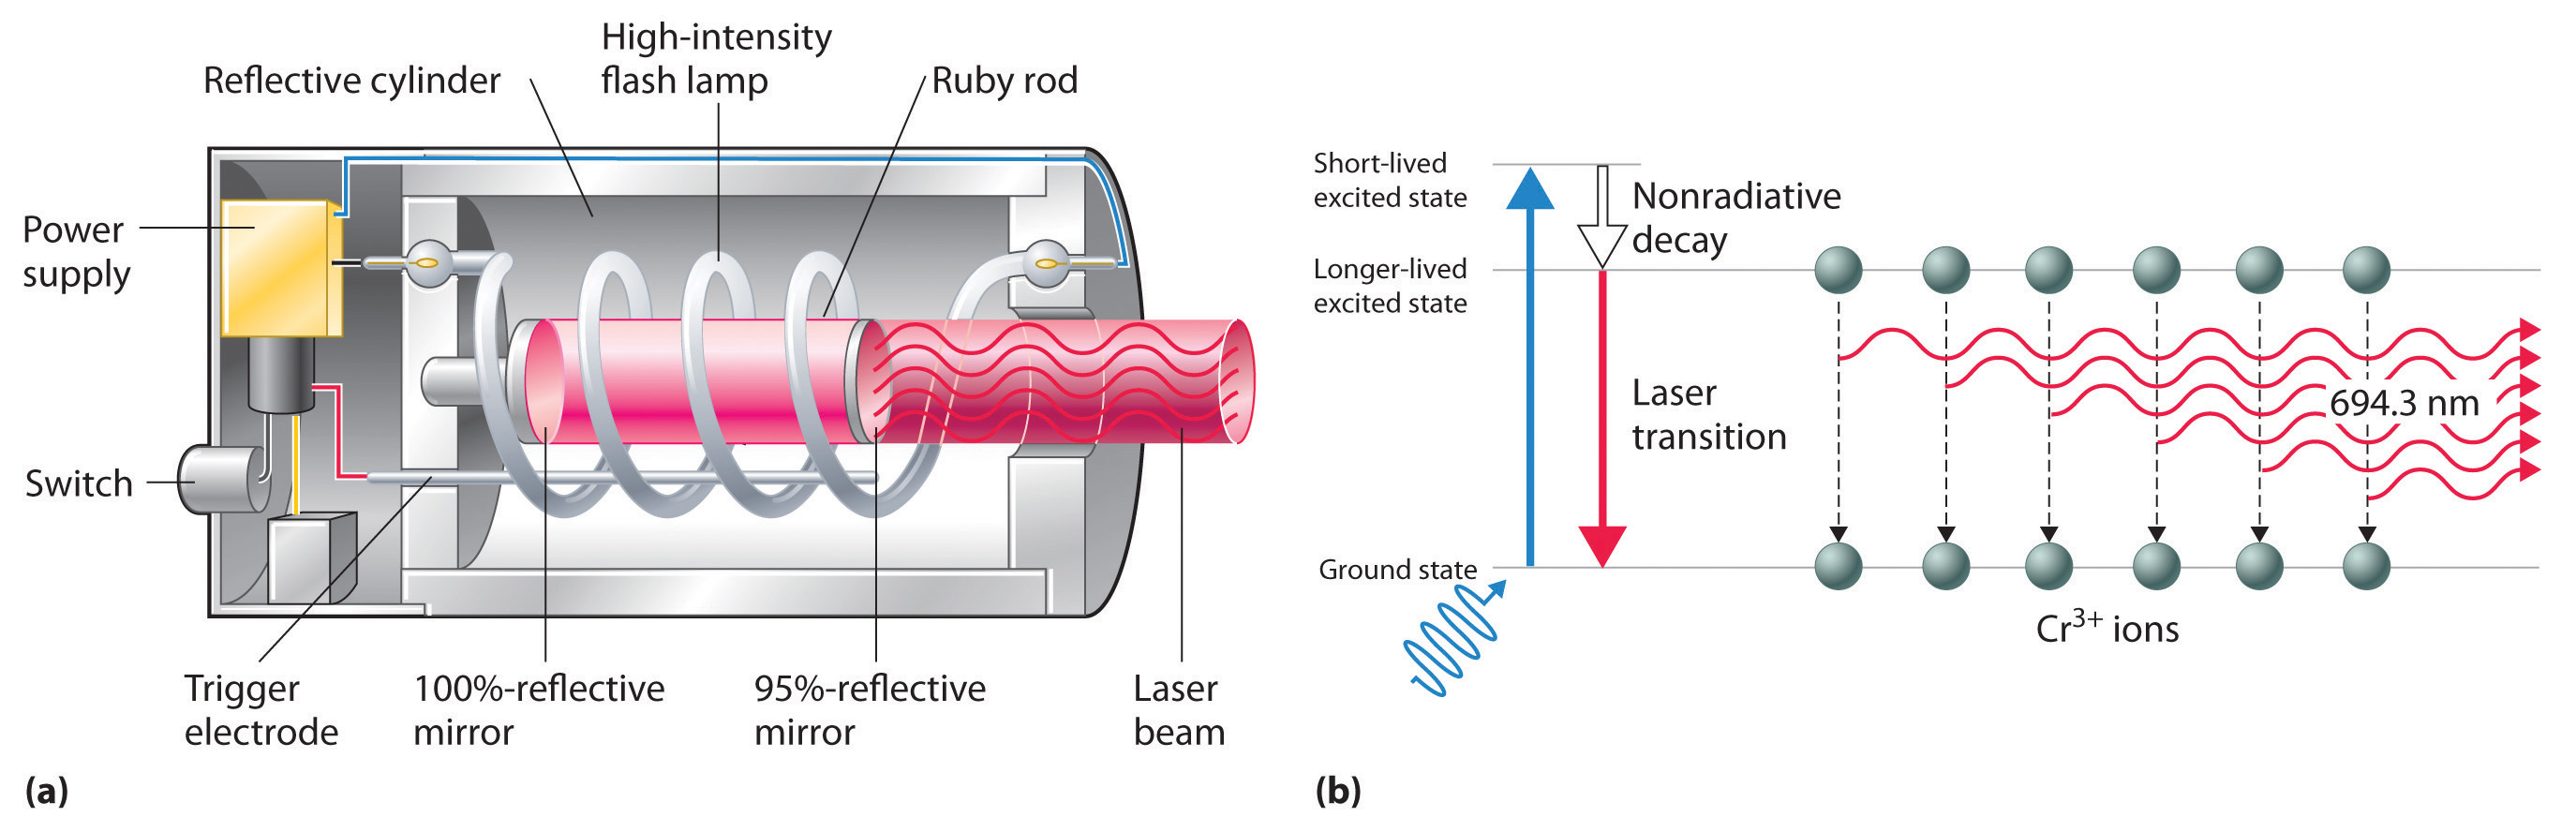 A ruby laser consists of a power supply, switch, trigger electrode, 100% reflective mirror, 95% reflective mirror, reflective cylinder, high-intensity flash lamp, ruby rod, and laser beam.